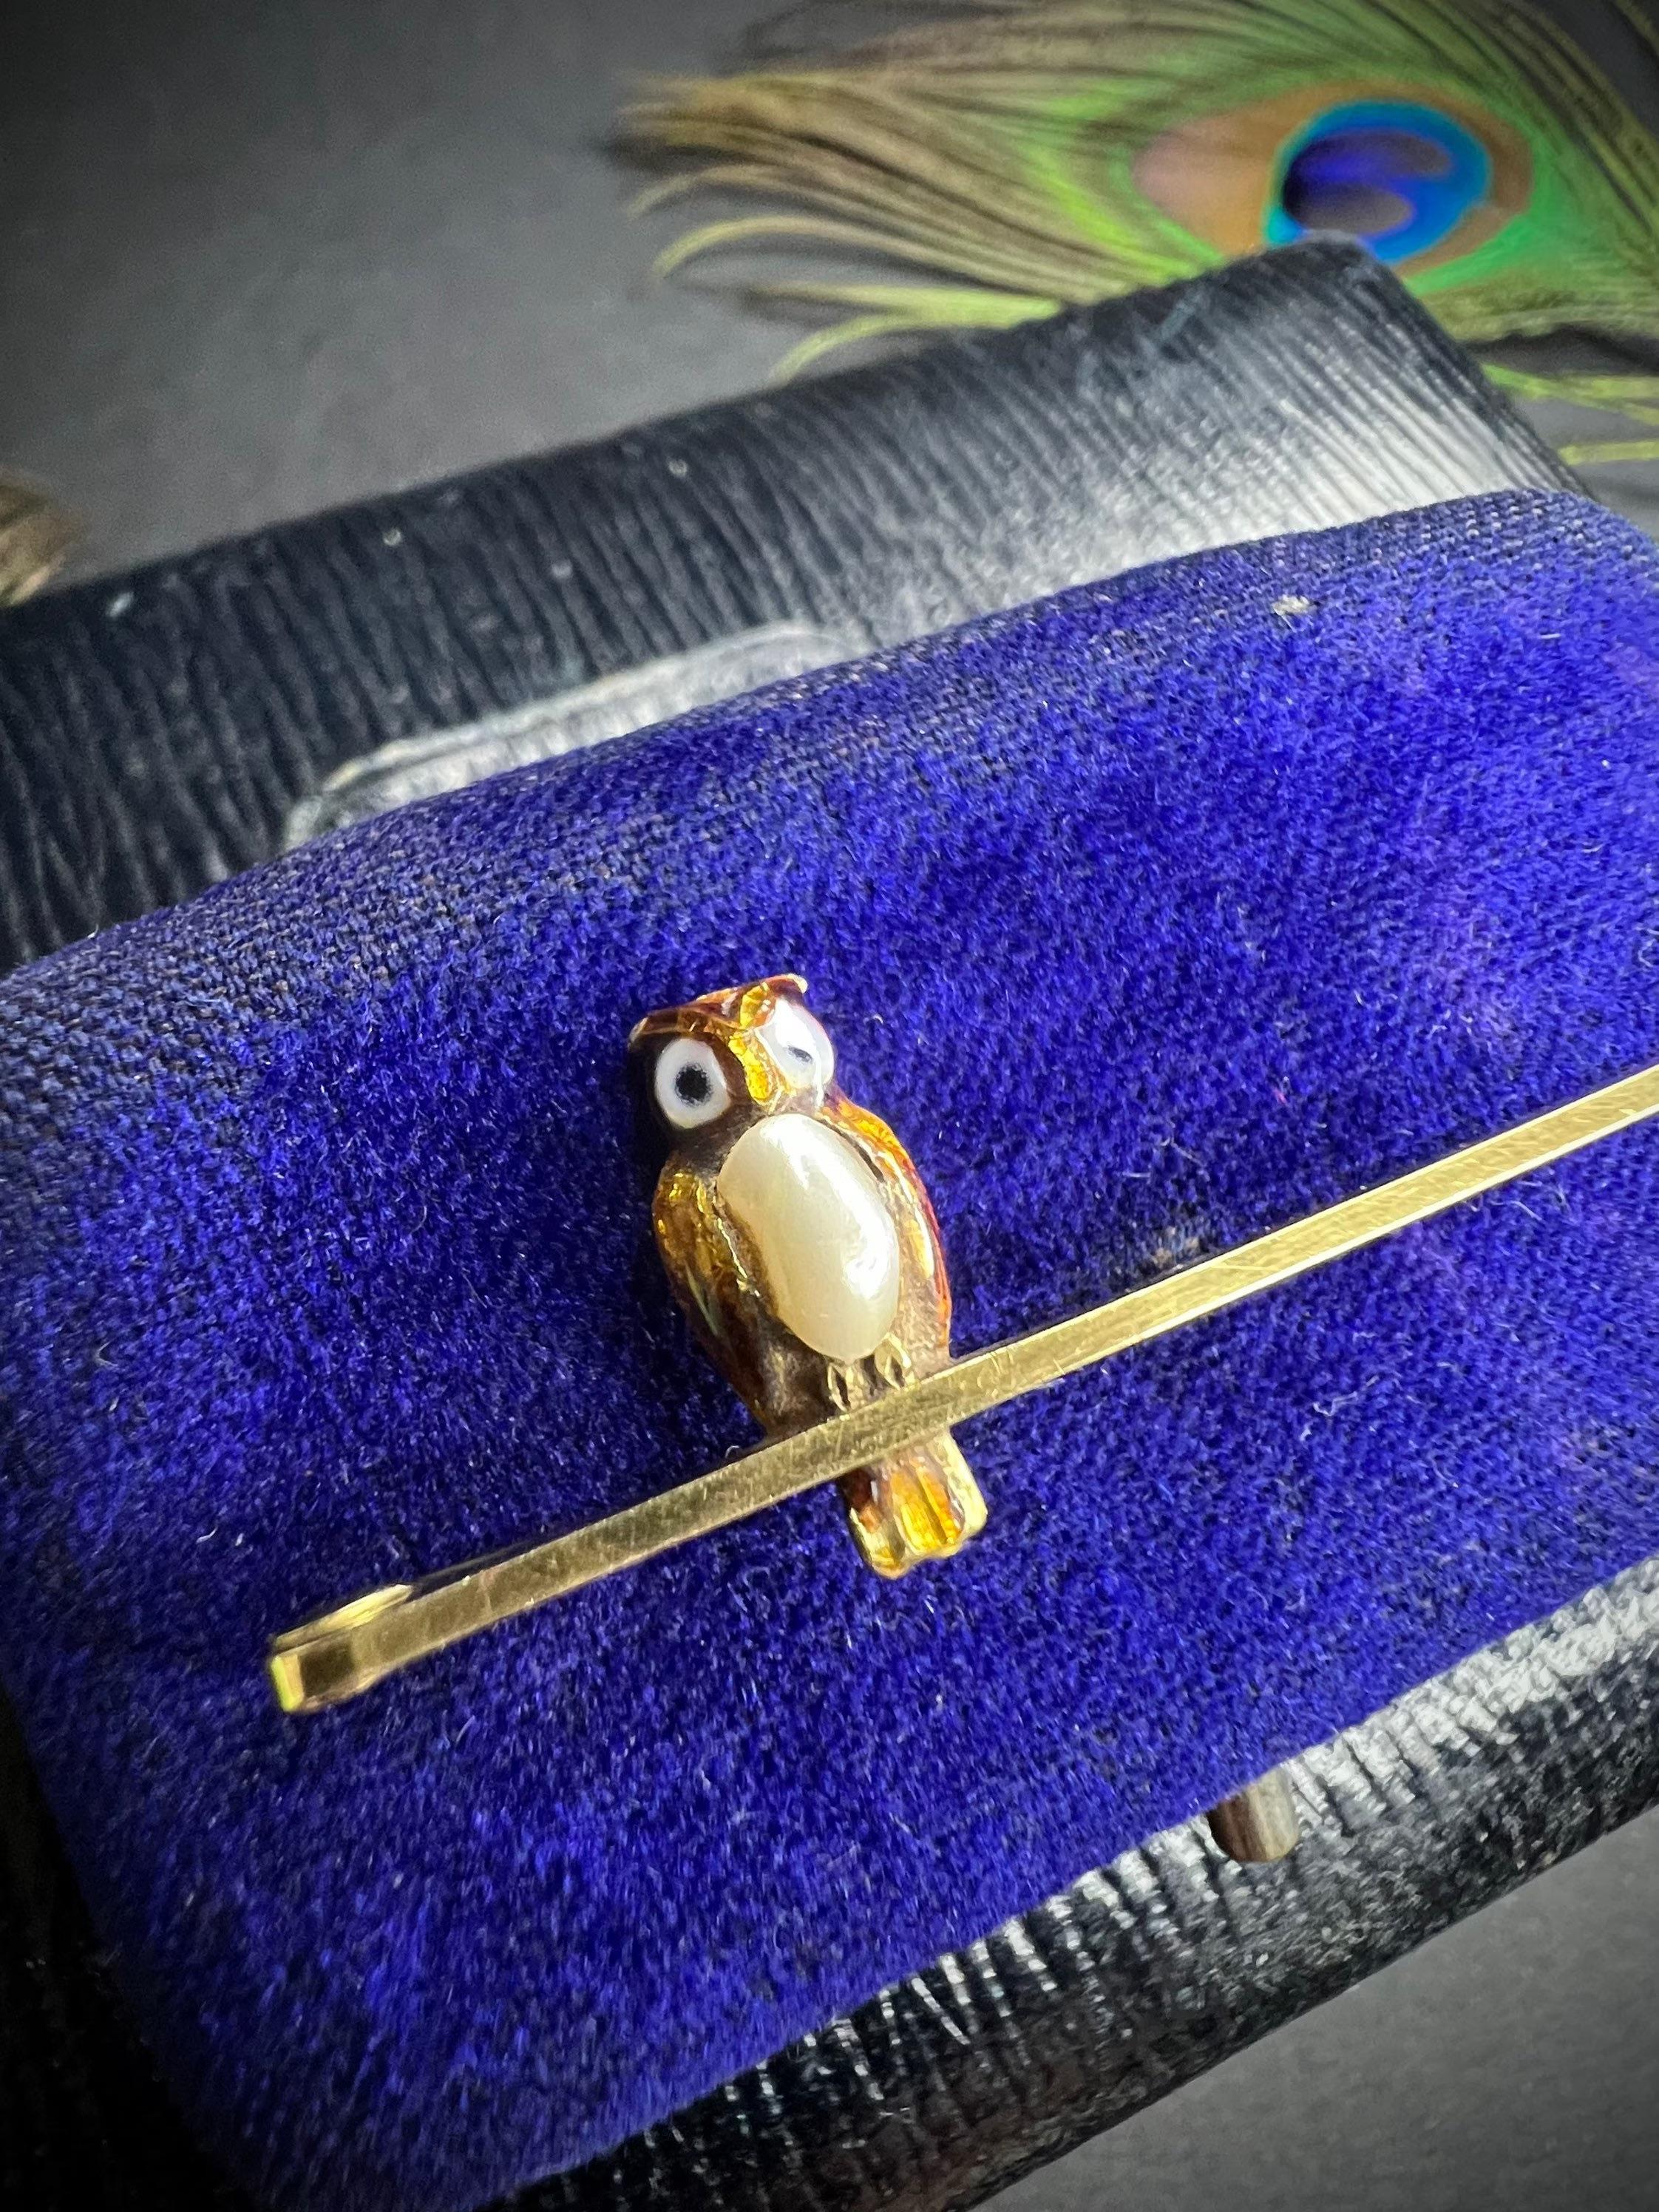 Antique Owl Brooch

15ct Gold Stamped 

Circa 1880

Lovely Victorian Bar Brooch with a Cute Little Enamel Owl Perched To One Side. He Has Lovely Blue Eyes & Natural Pearl Belly. 

Measures Approx Length 51mm x 1mm

Owl Measures 14.5mm Tall & 6.5mm